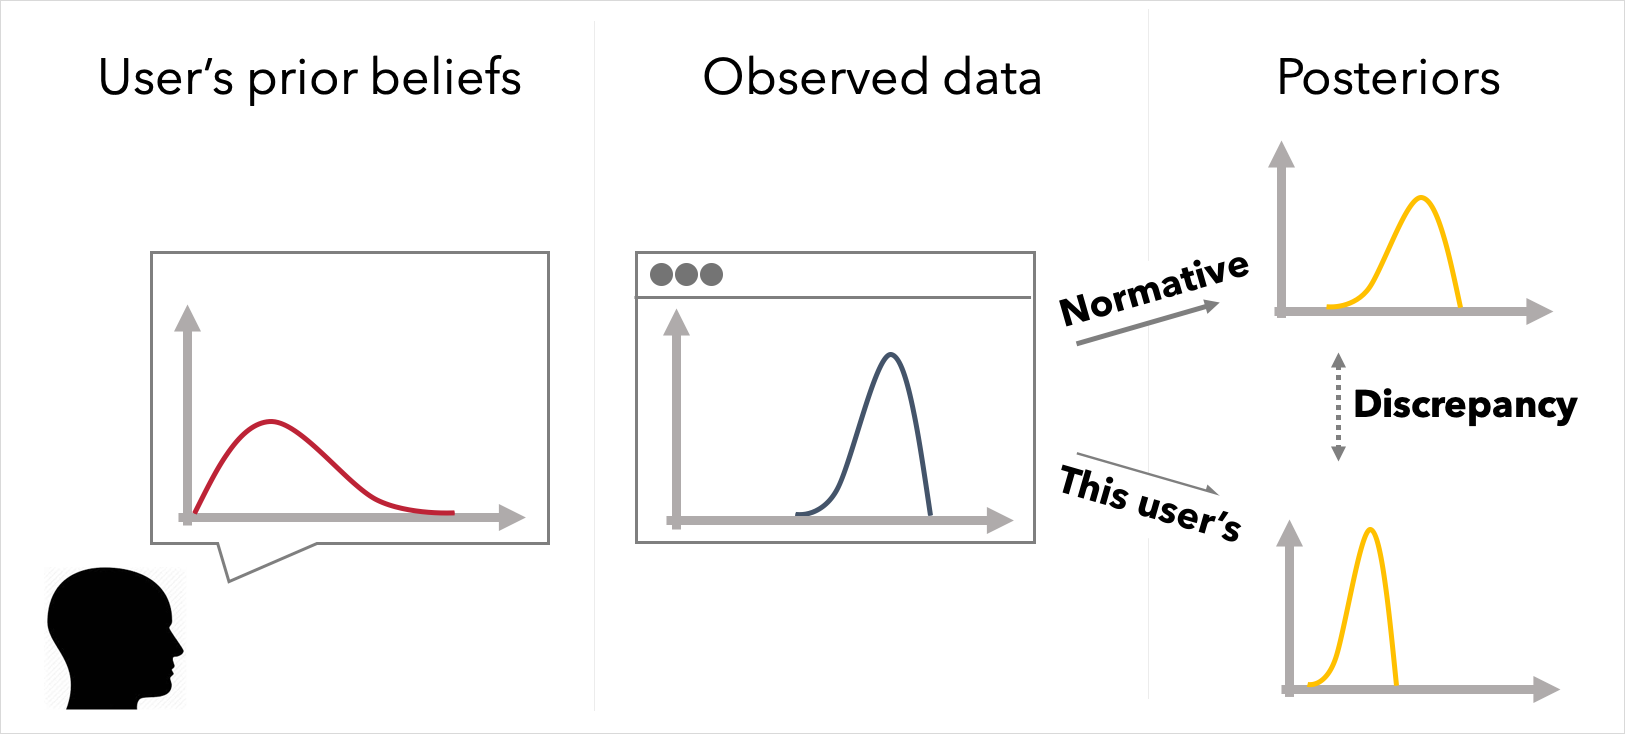 A depiction of how we apply a Bayesian cognitive modeling approach to a simple data interpretation task to understand where people deviate from normative Bayesian inference.